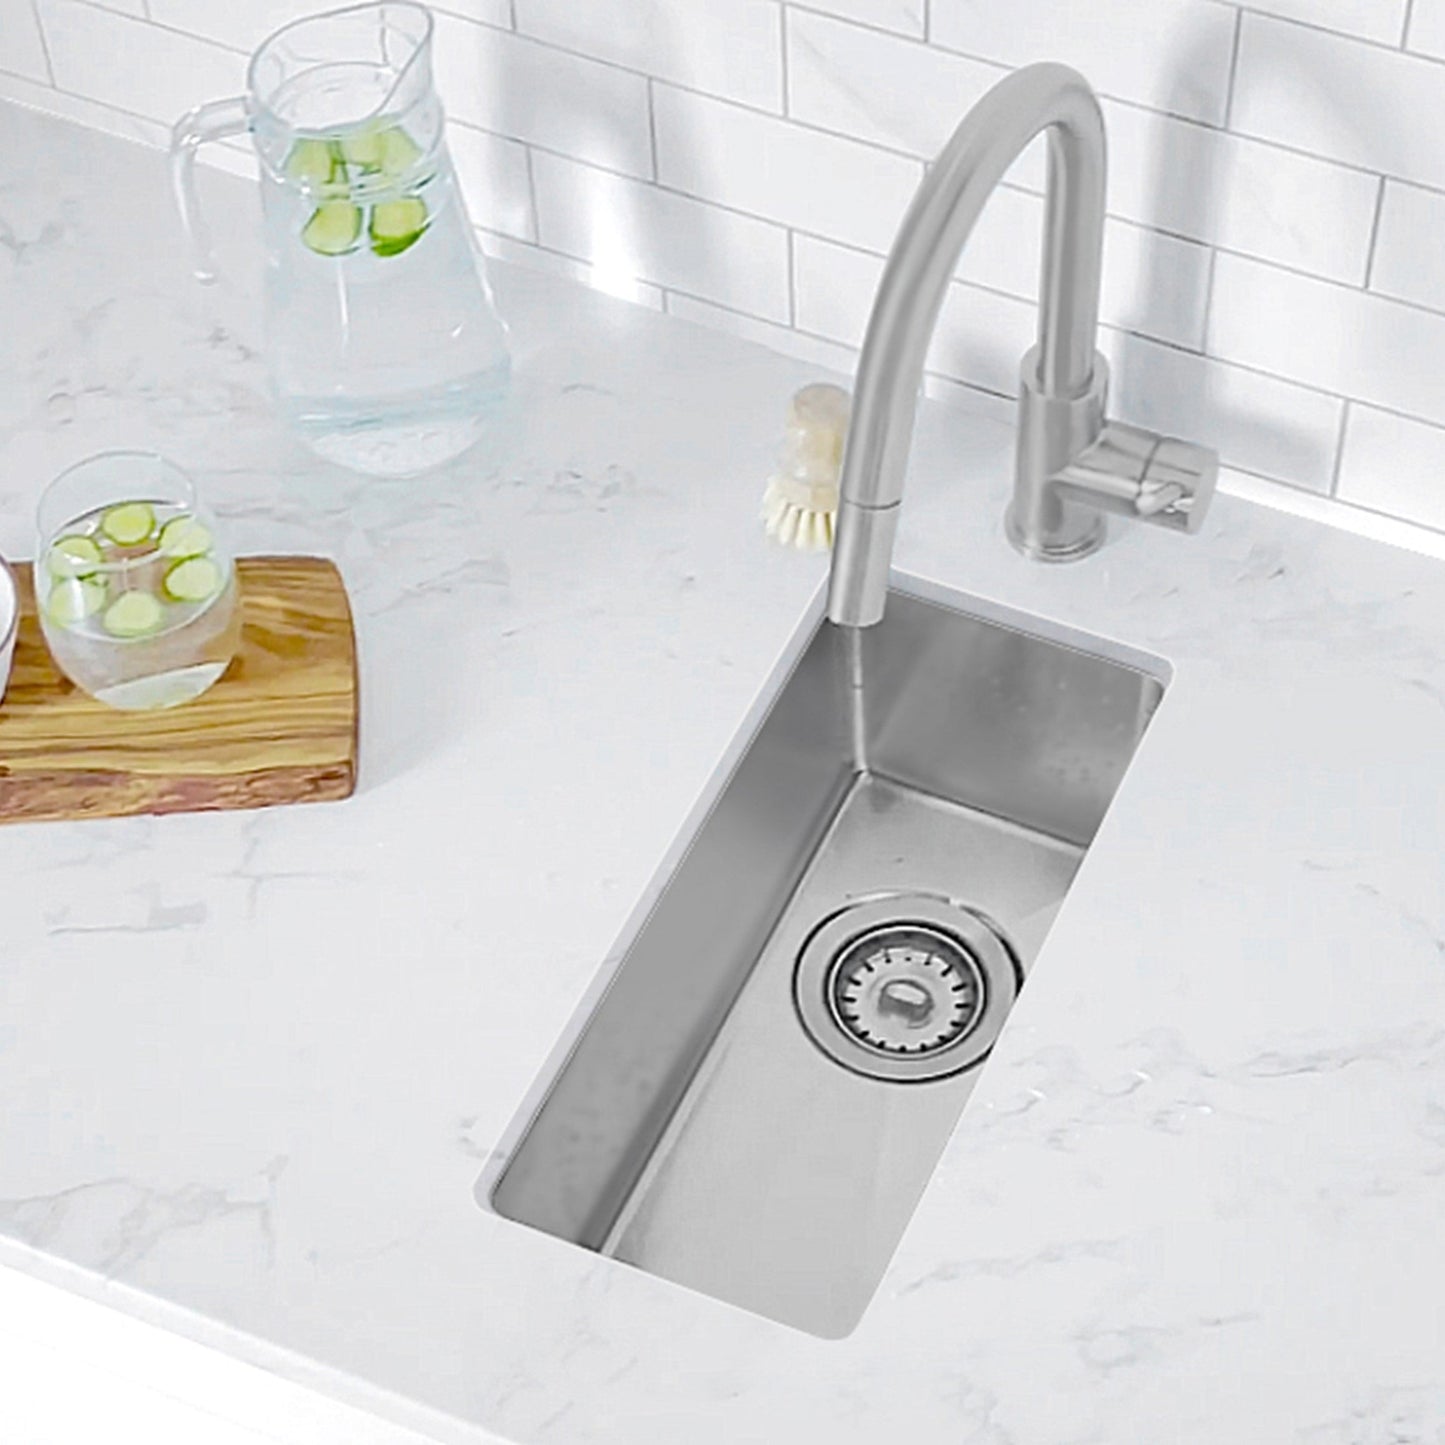 Stylish  9 inch Single Bowl Undermount and Drop-in Stainless Steel Kitchen Sink